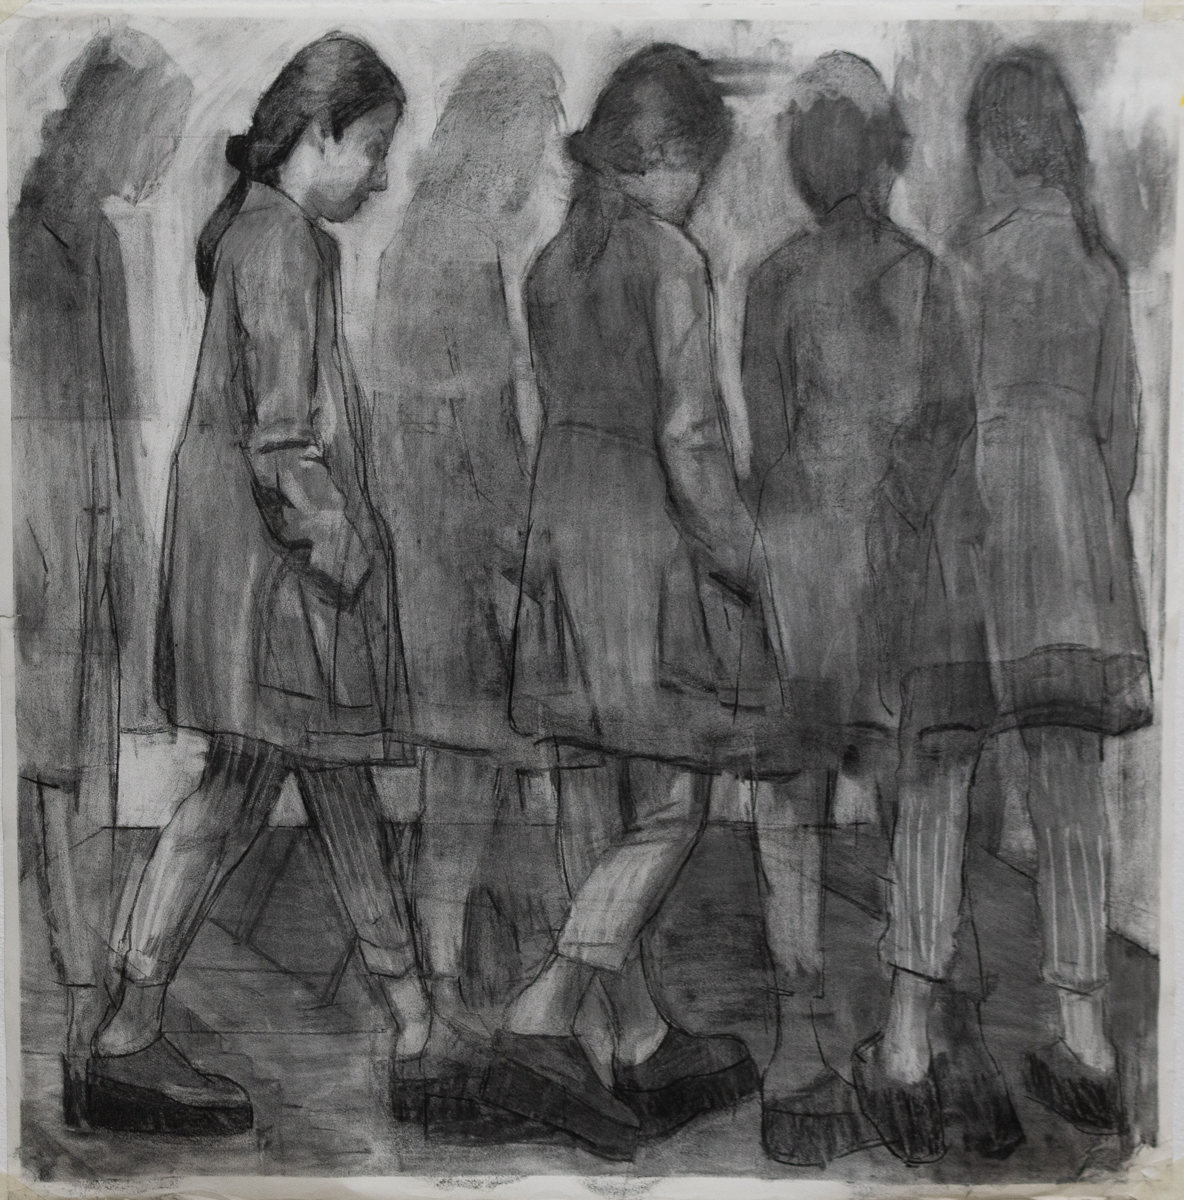 Walking Thoughts, charcoal on ingres paper, 70 x 70 cm, 2021 (DEPOT)